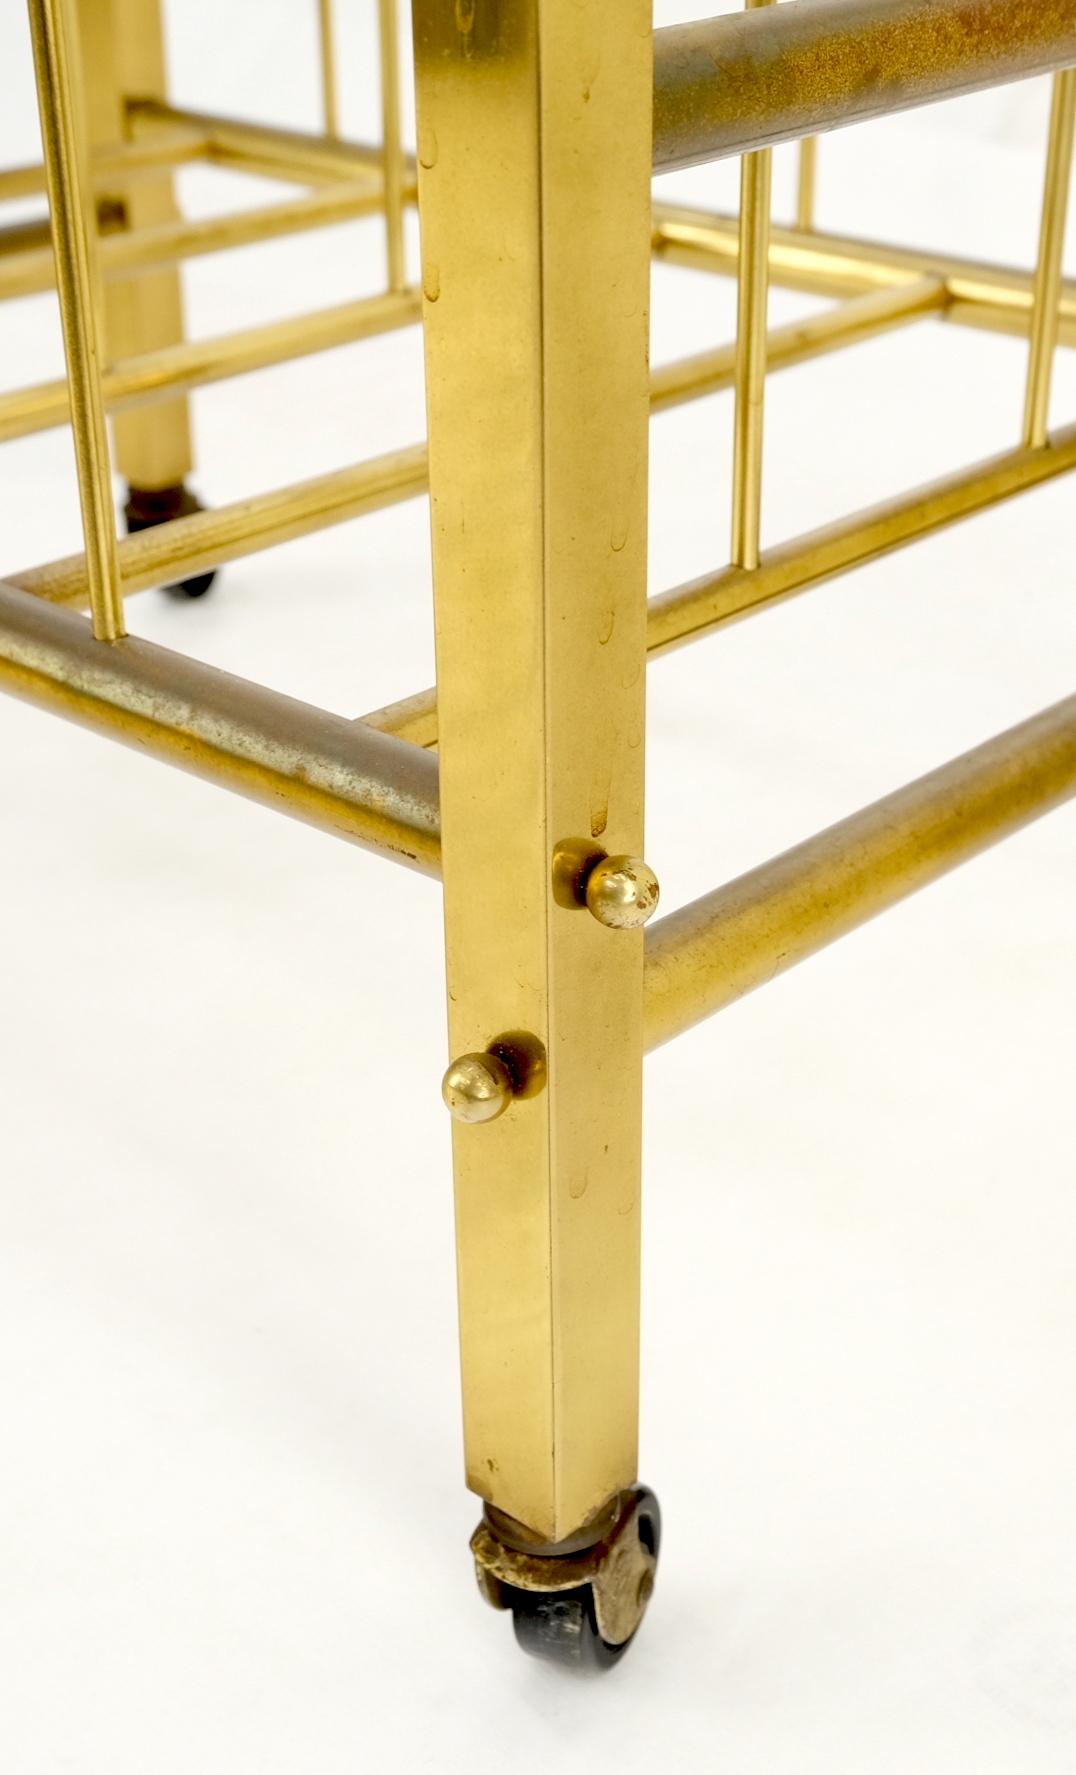 Solid brass tube design Mid-Century Modern magazine stand on casters.